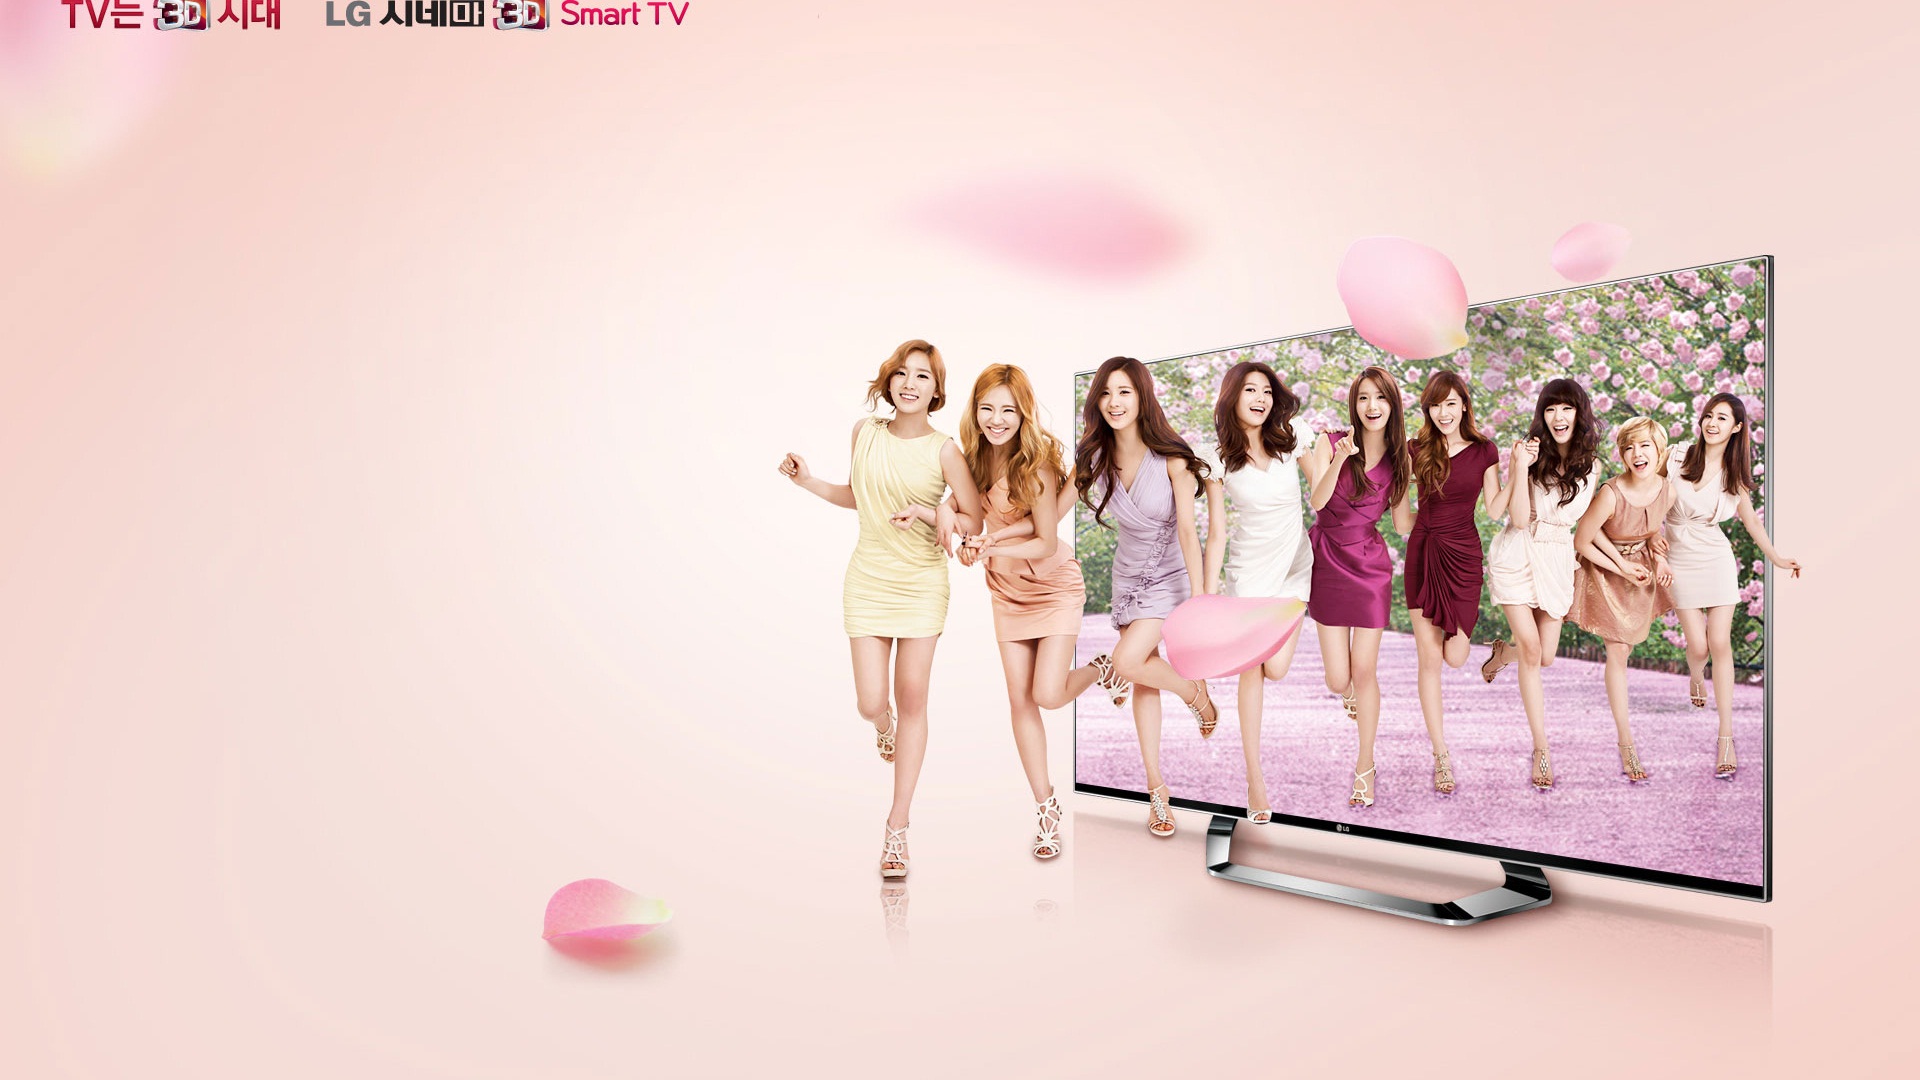 Girls Generation ACE and LG endorsements ads HD wallpapers #11 - 1920x1080